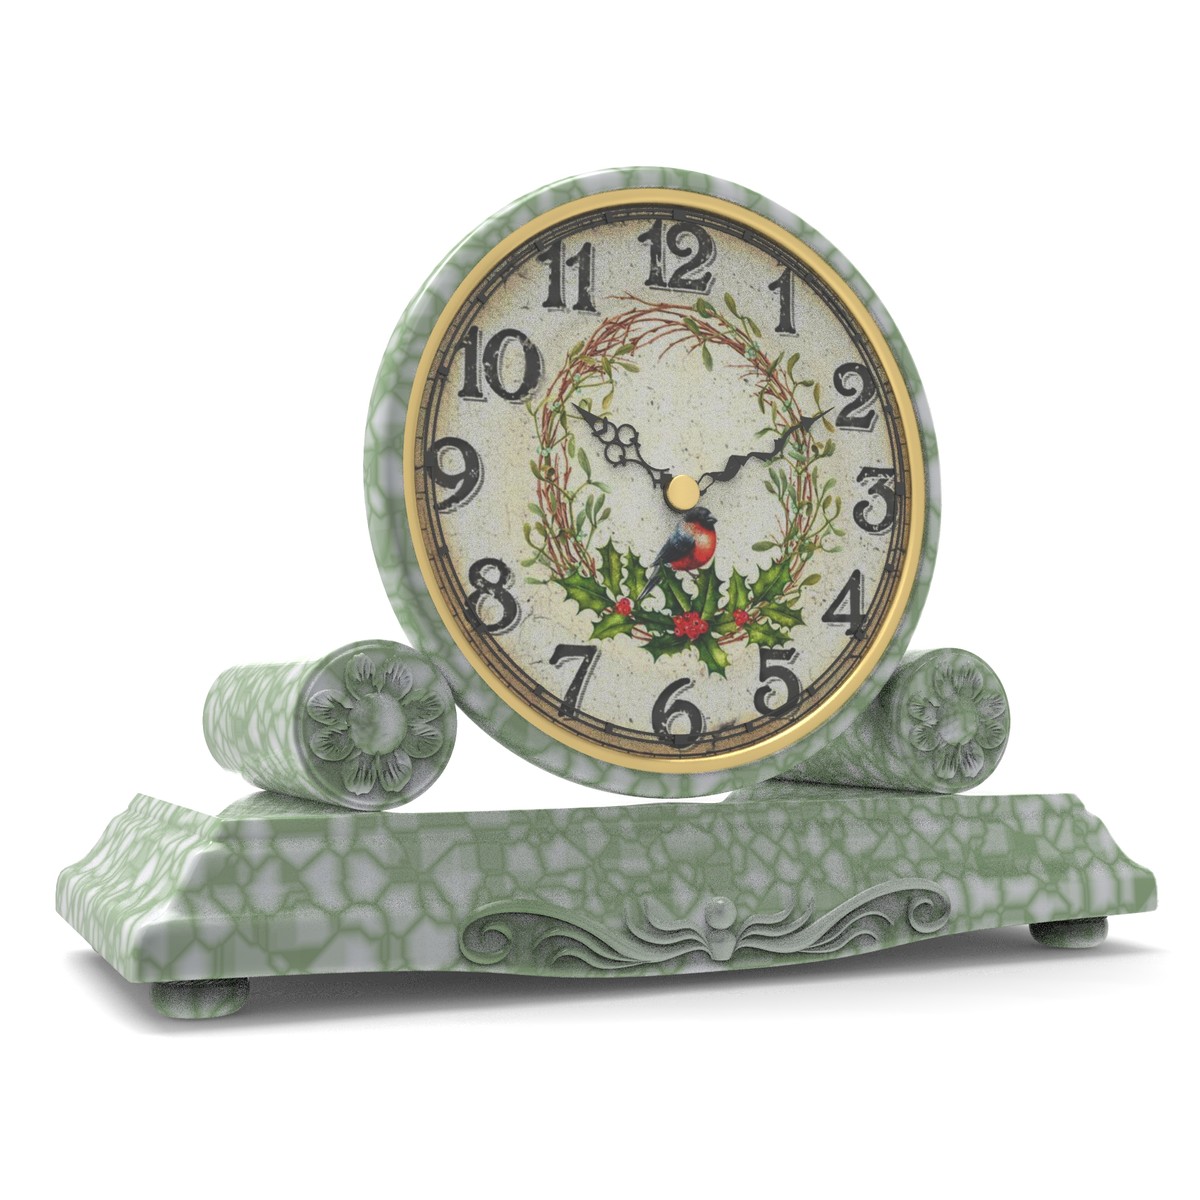 Creation of a 3D model of a mantel clock, realistic rendering and animation.